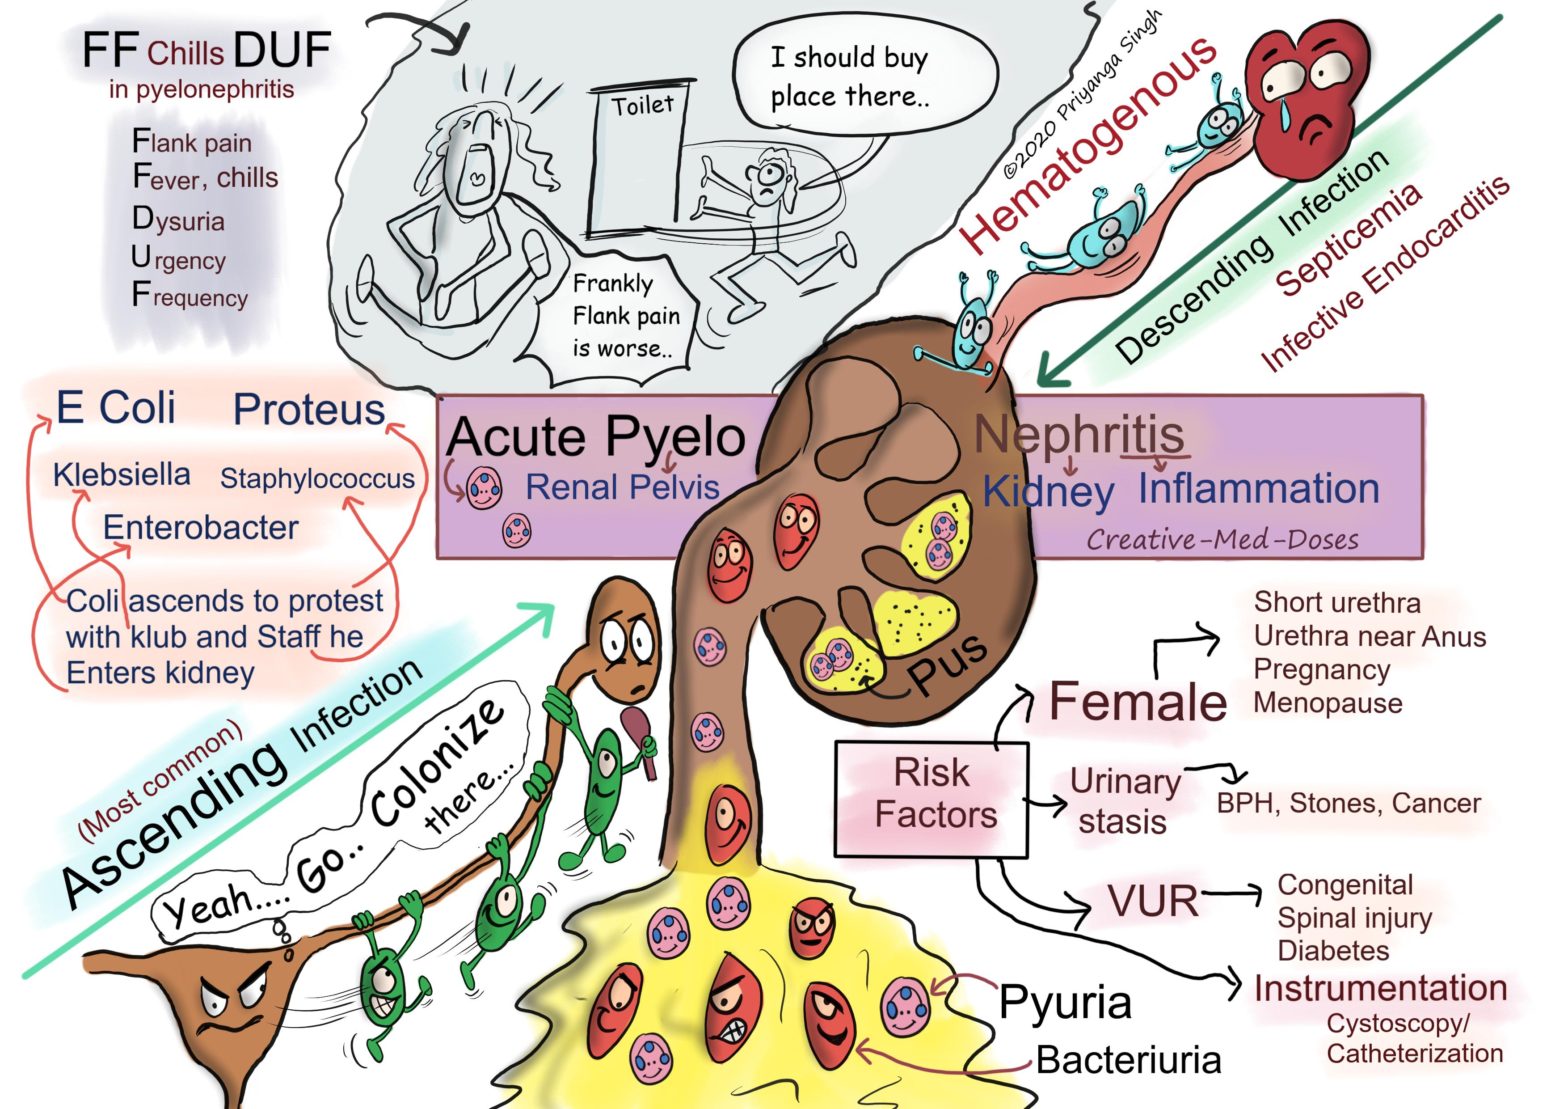 Acute pyelonephritis pathogenesis and clinical features